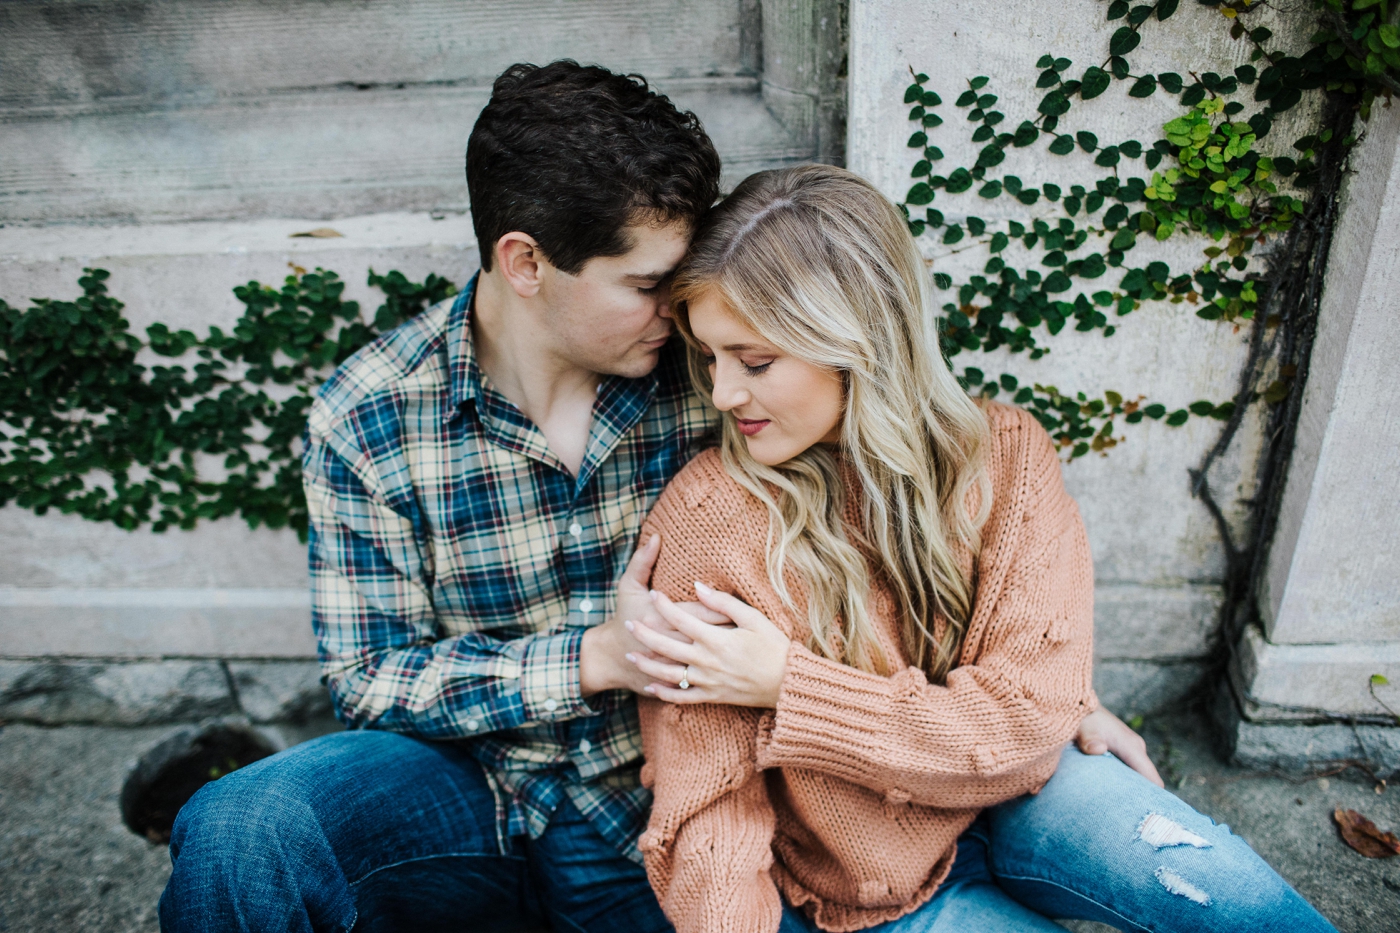 Macy & Matthew’s engagement session in Downtown Savannah | Izzy and Co.